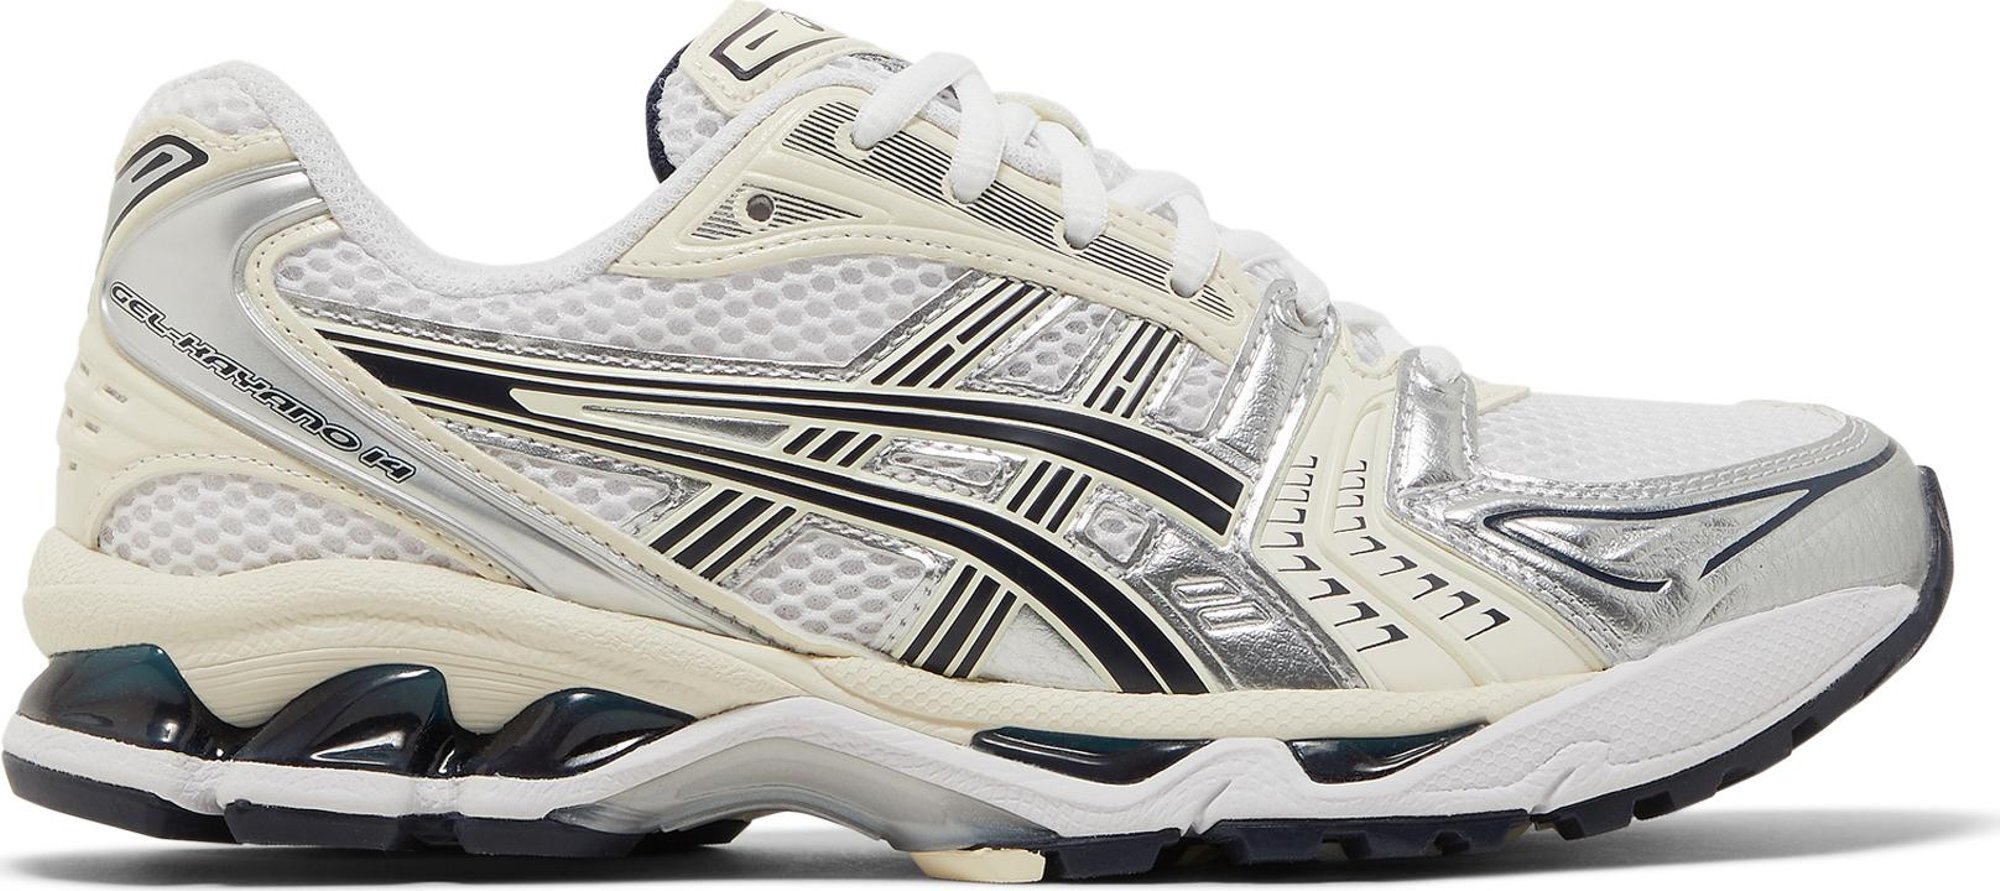 Buy Wmns Gel Kayano 14 'White Midnight' - 1202A056 109 | GOAT